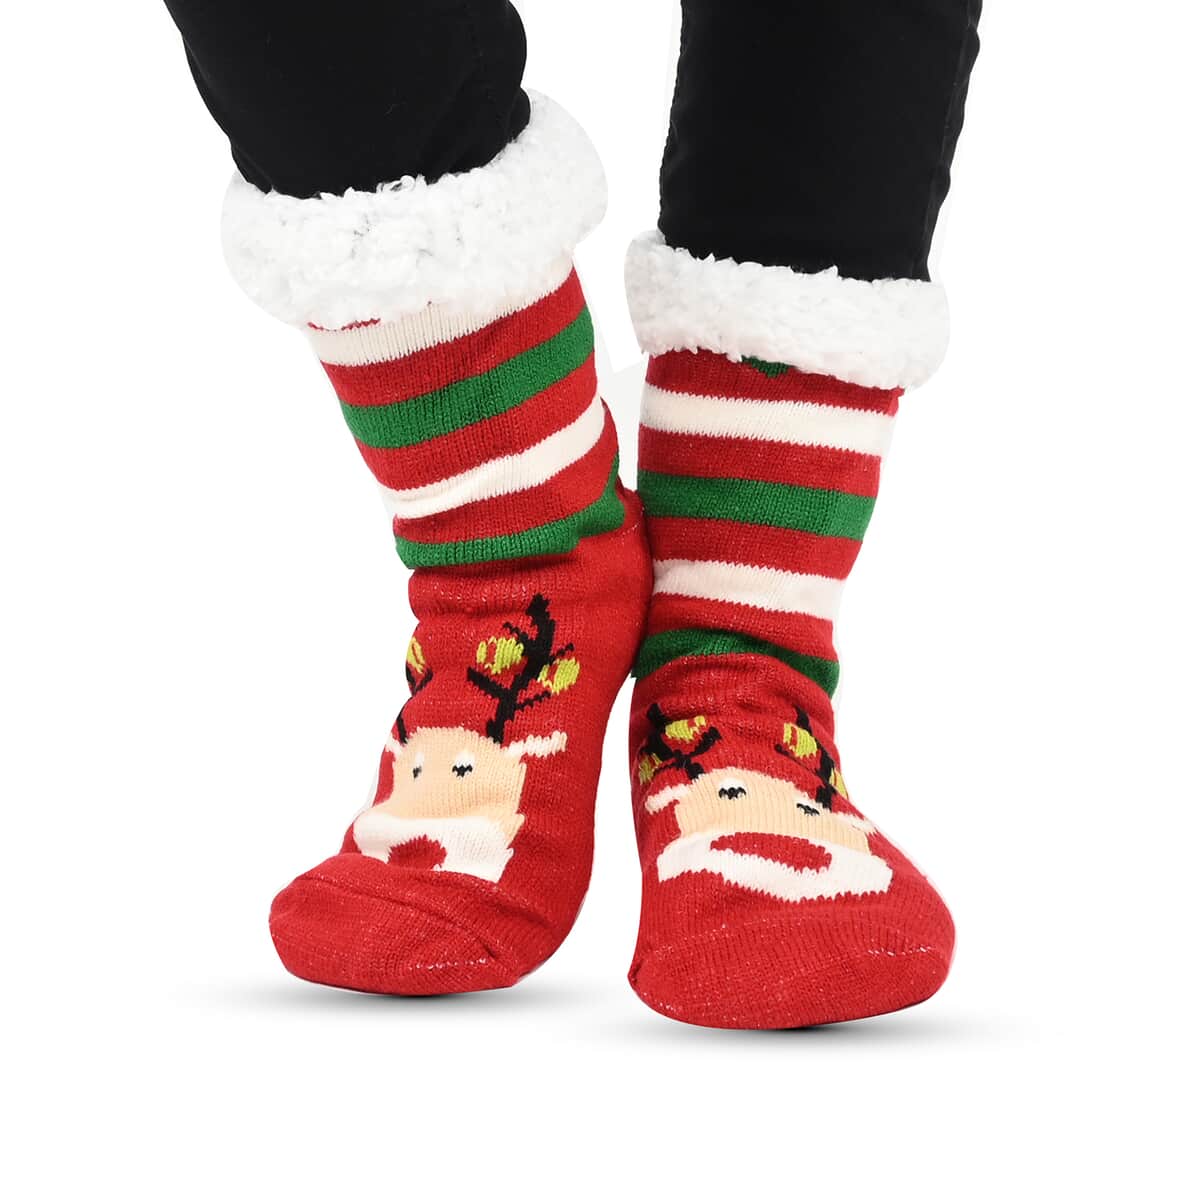 Homesmart Set of 2 Pairs Warm & Fuzzy Snowman and Reindeer Pattern Sherpa Lined Slipper Socks (Women's Size 5-10) with Anti Slip Rubber image number 3